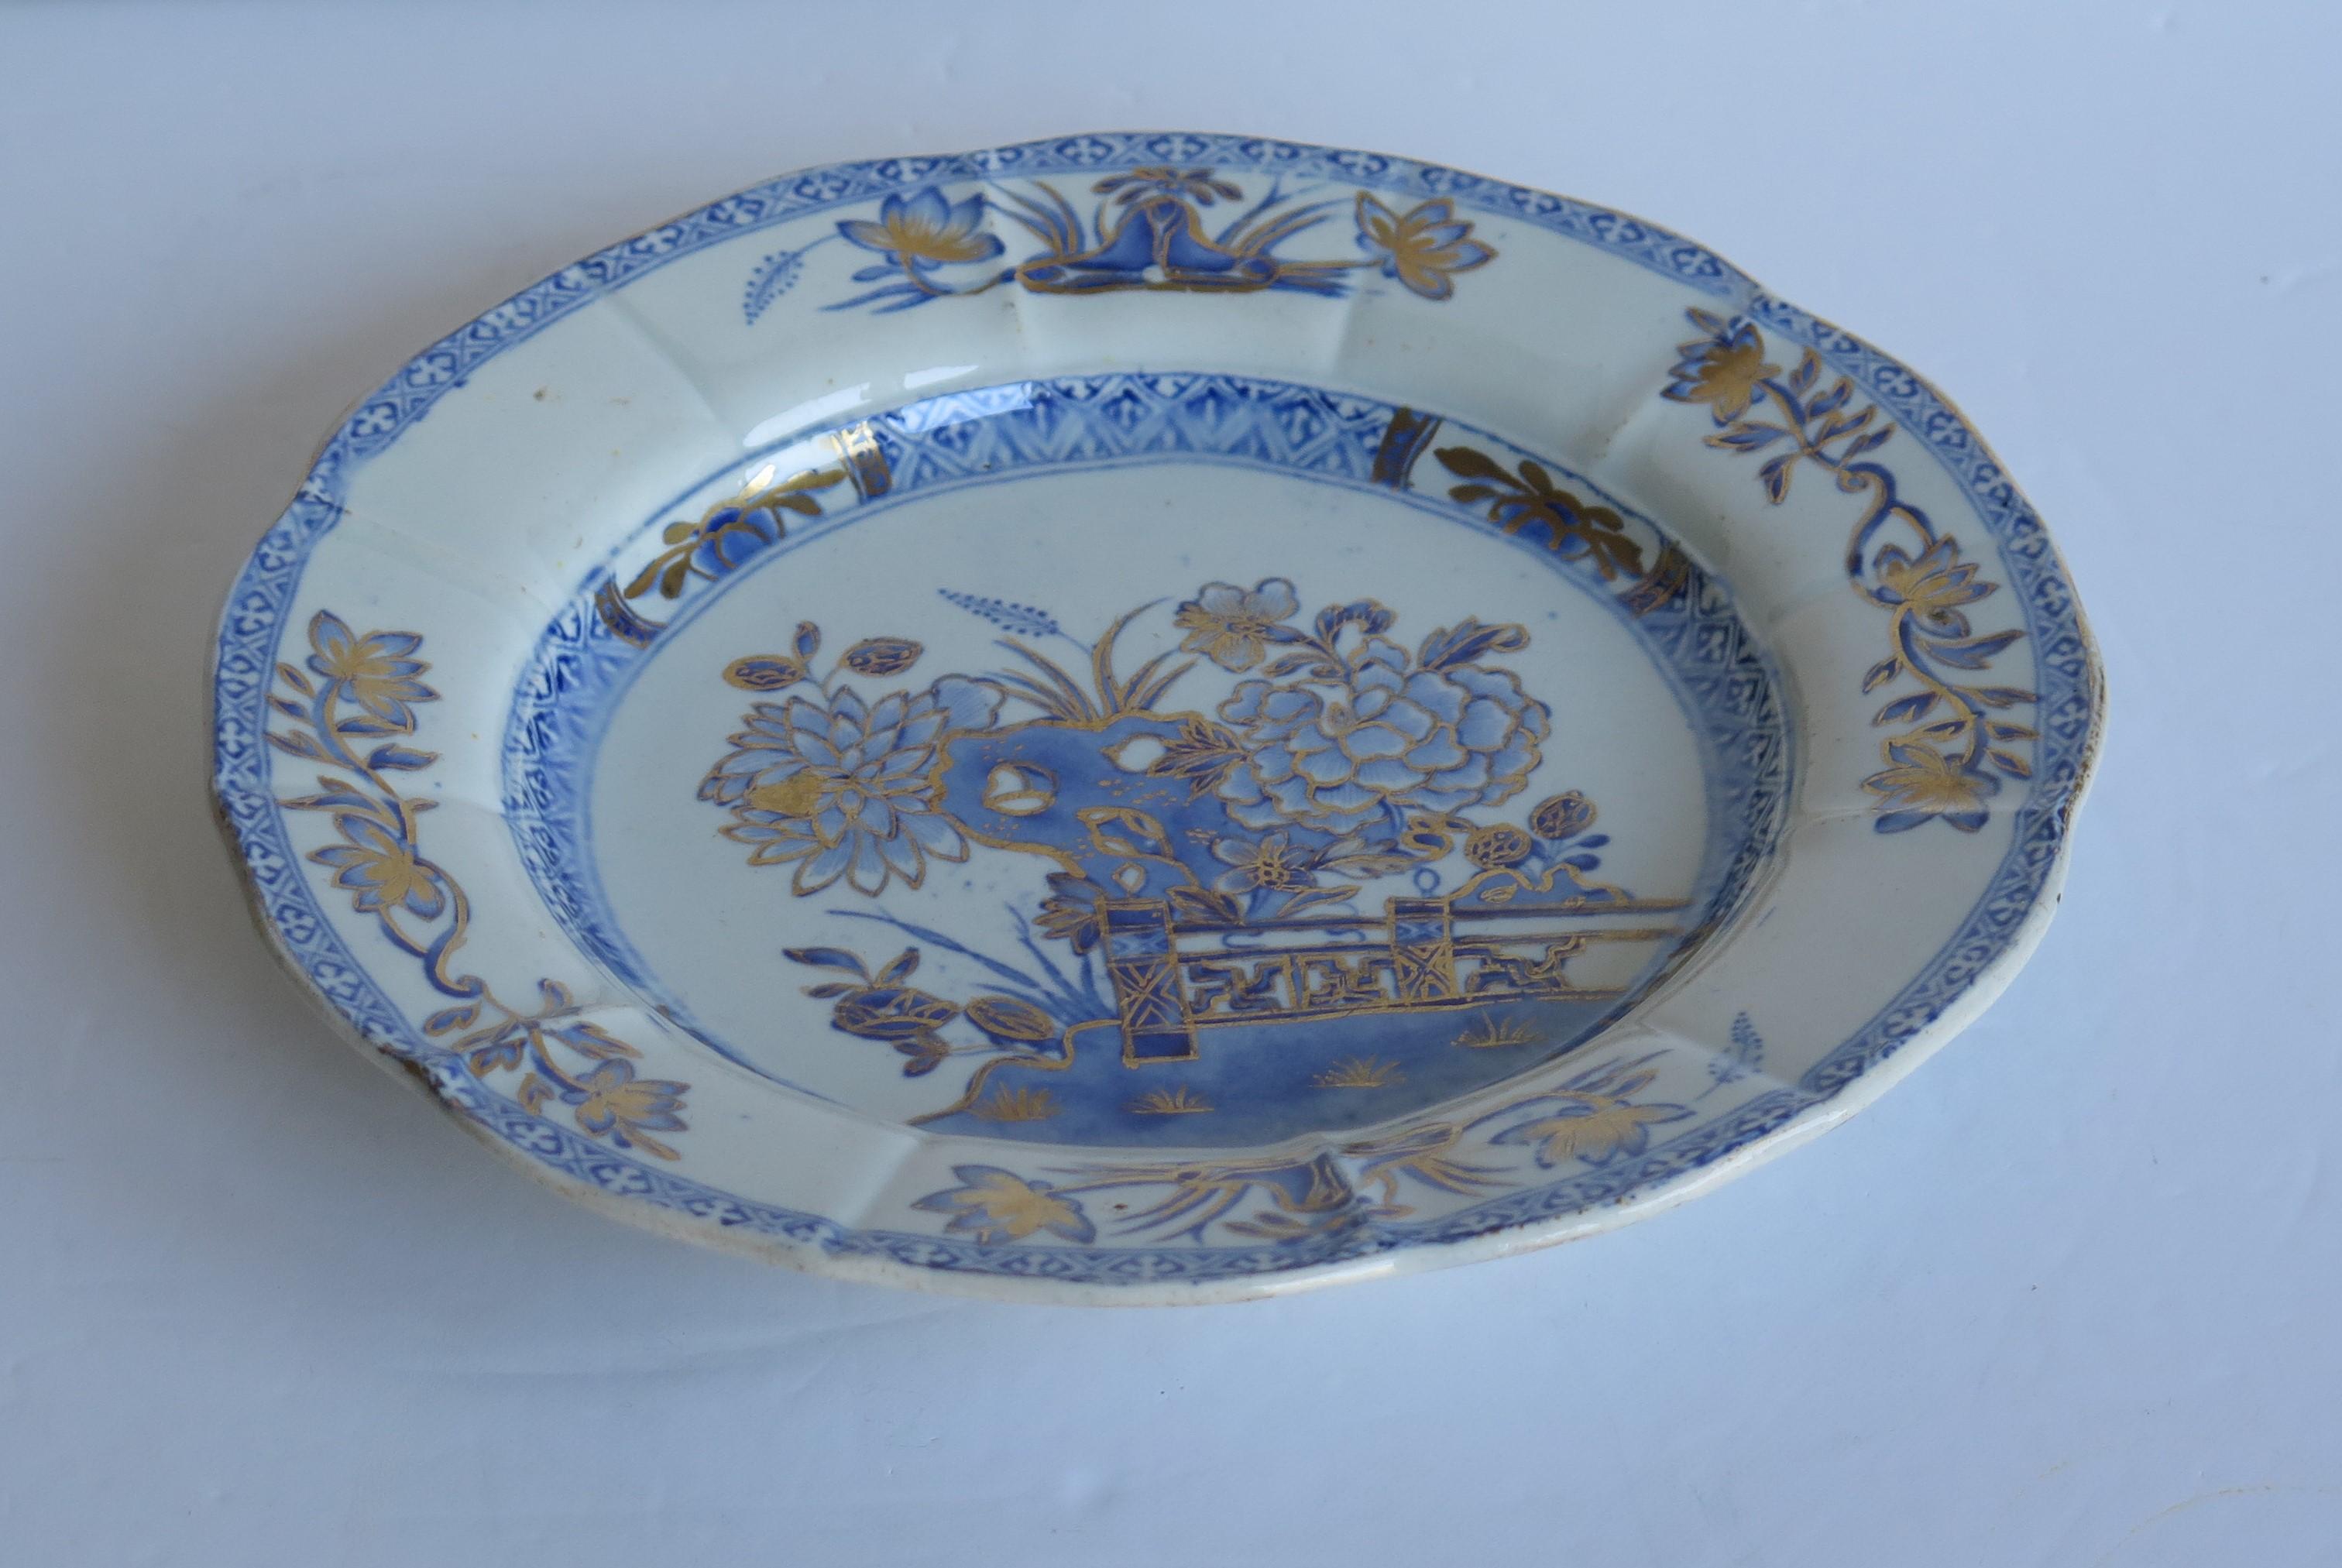 This is a very good early Mason's Ironstone pottery desert plate or dish in the Cross Fence gilded pattern, produced by the Mason's factory at Lane Delph, Staffordshire, England, circa 1813-1820.

The plate is circular with radial ribs and a